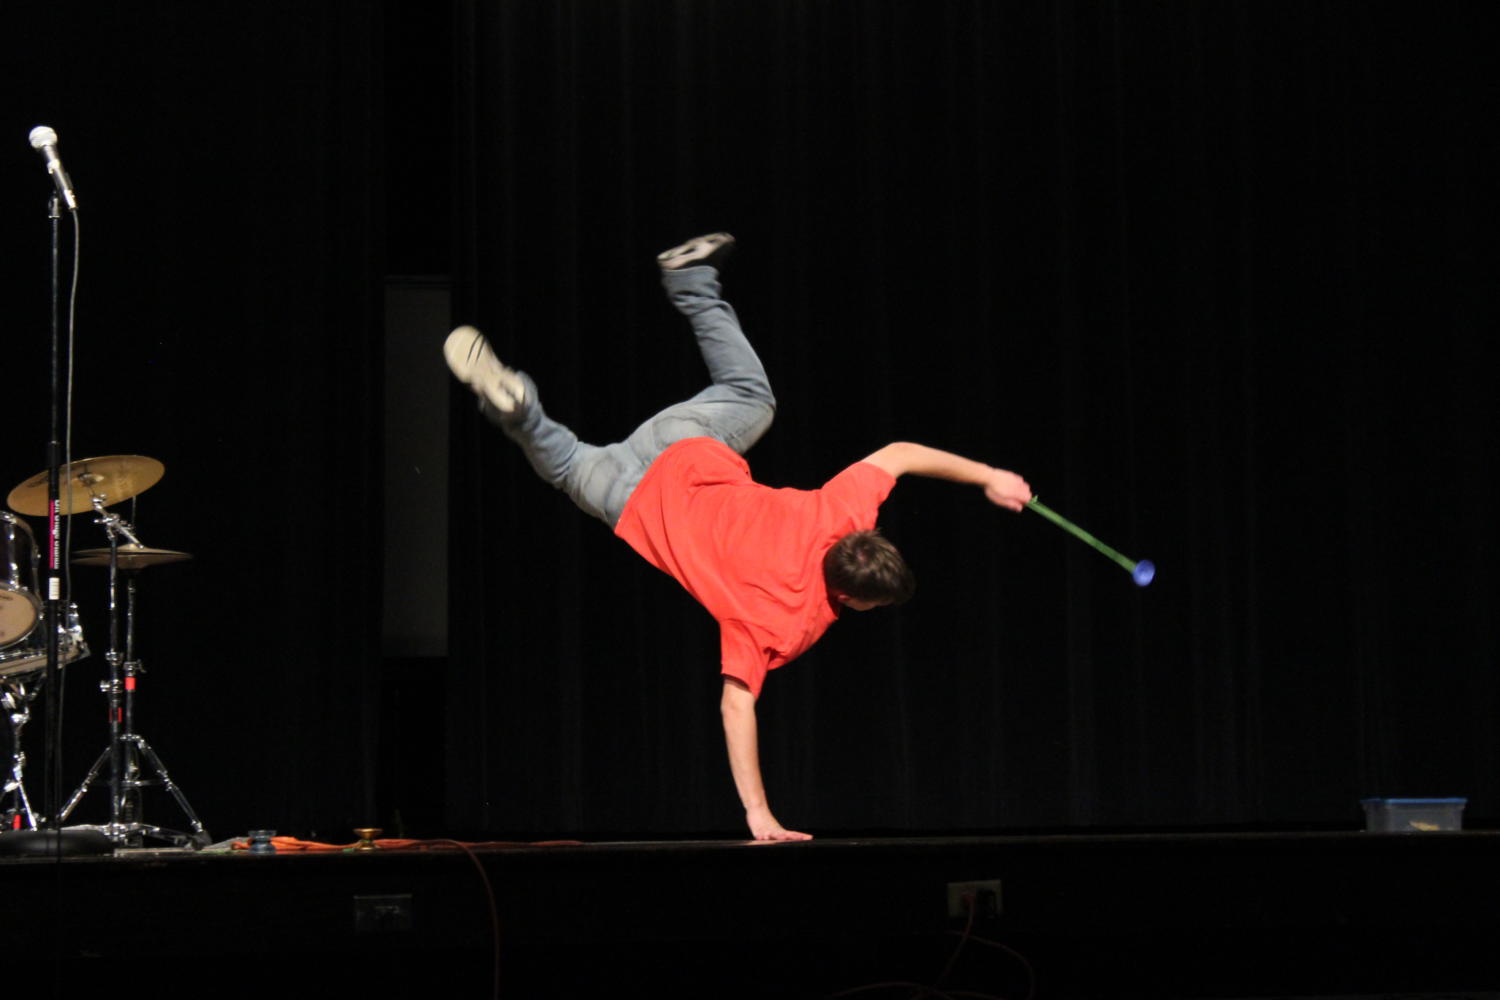 Backflips and yoyo? What more could a man do in a talent show?!